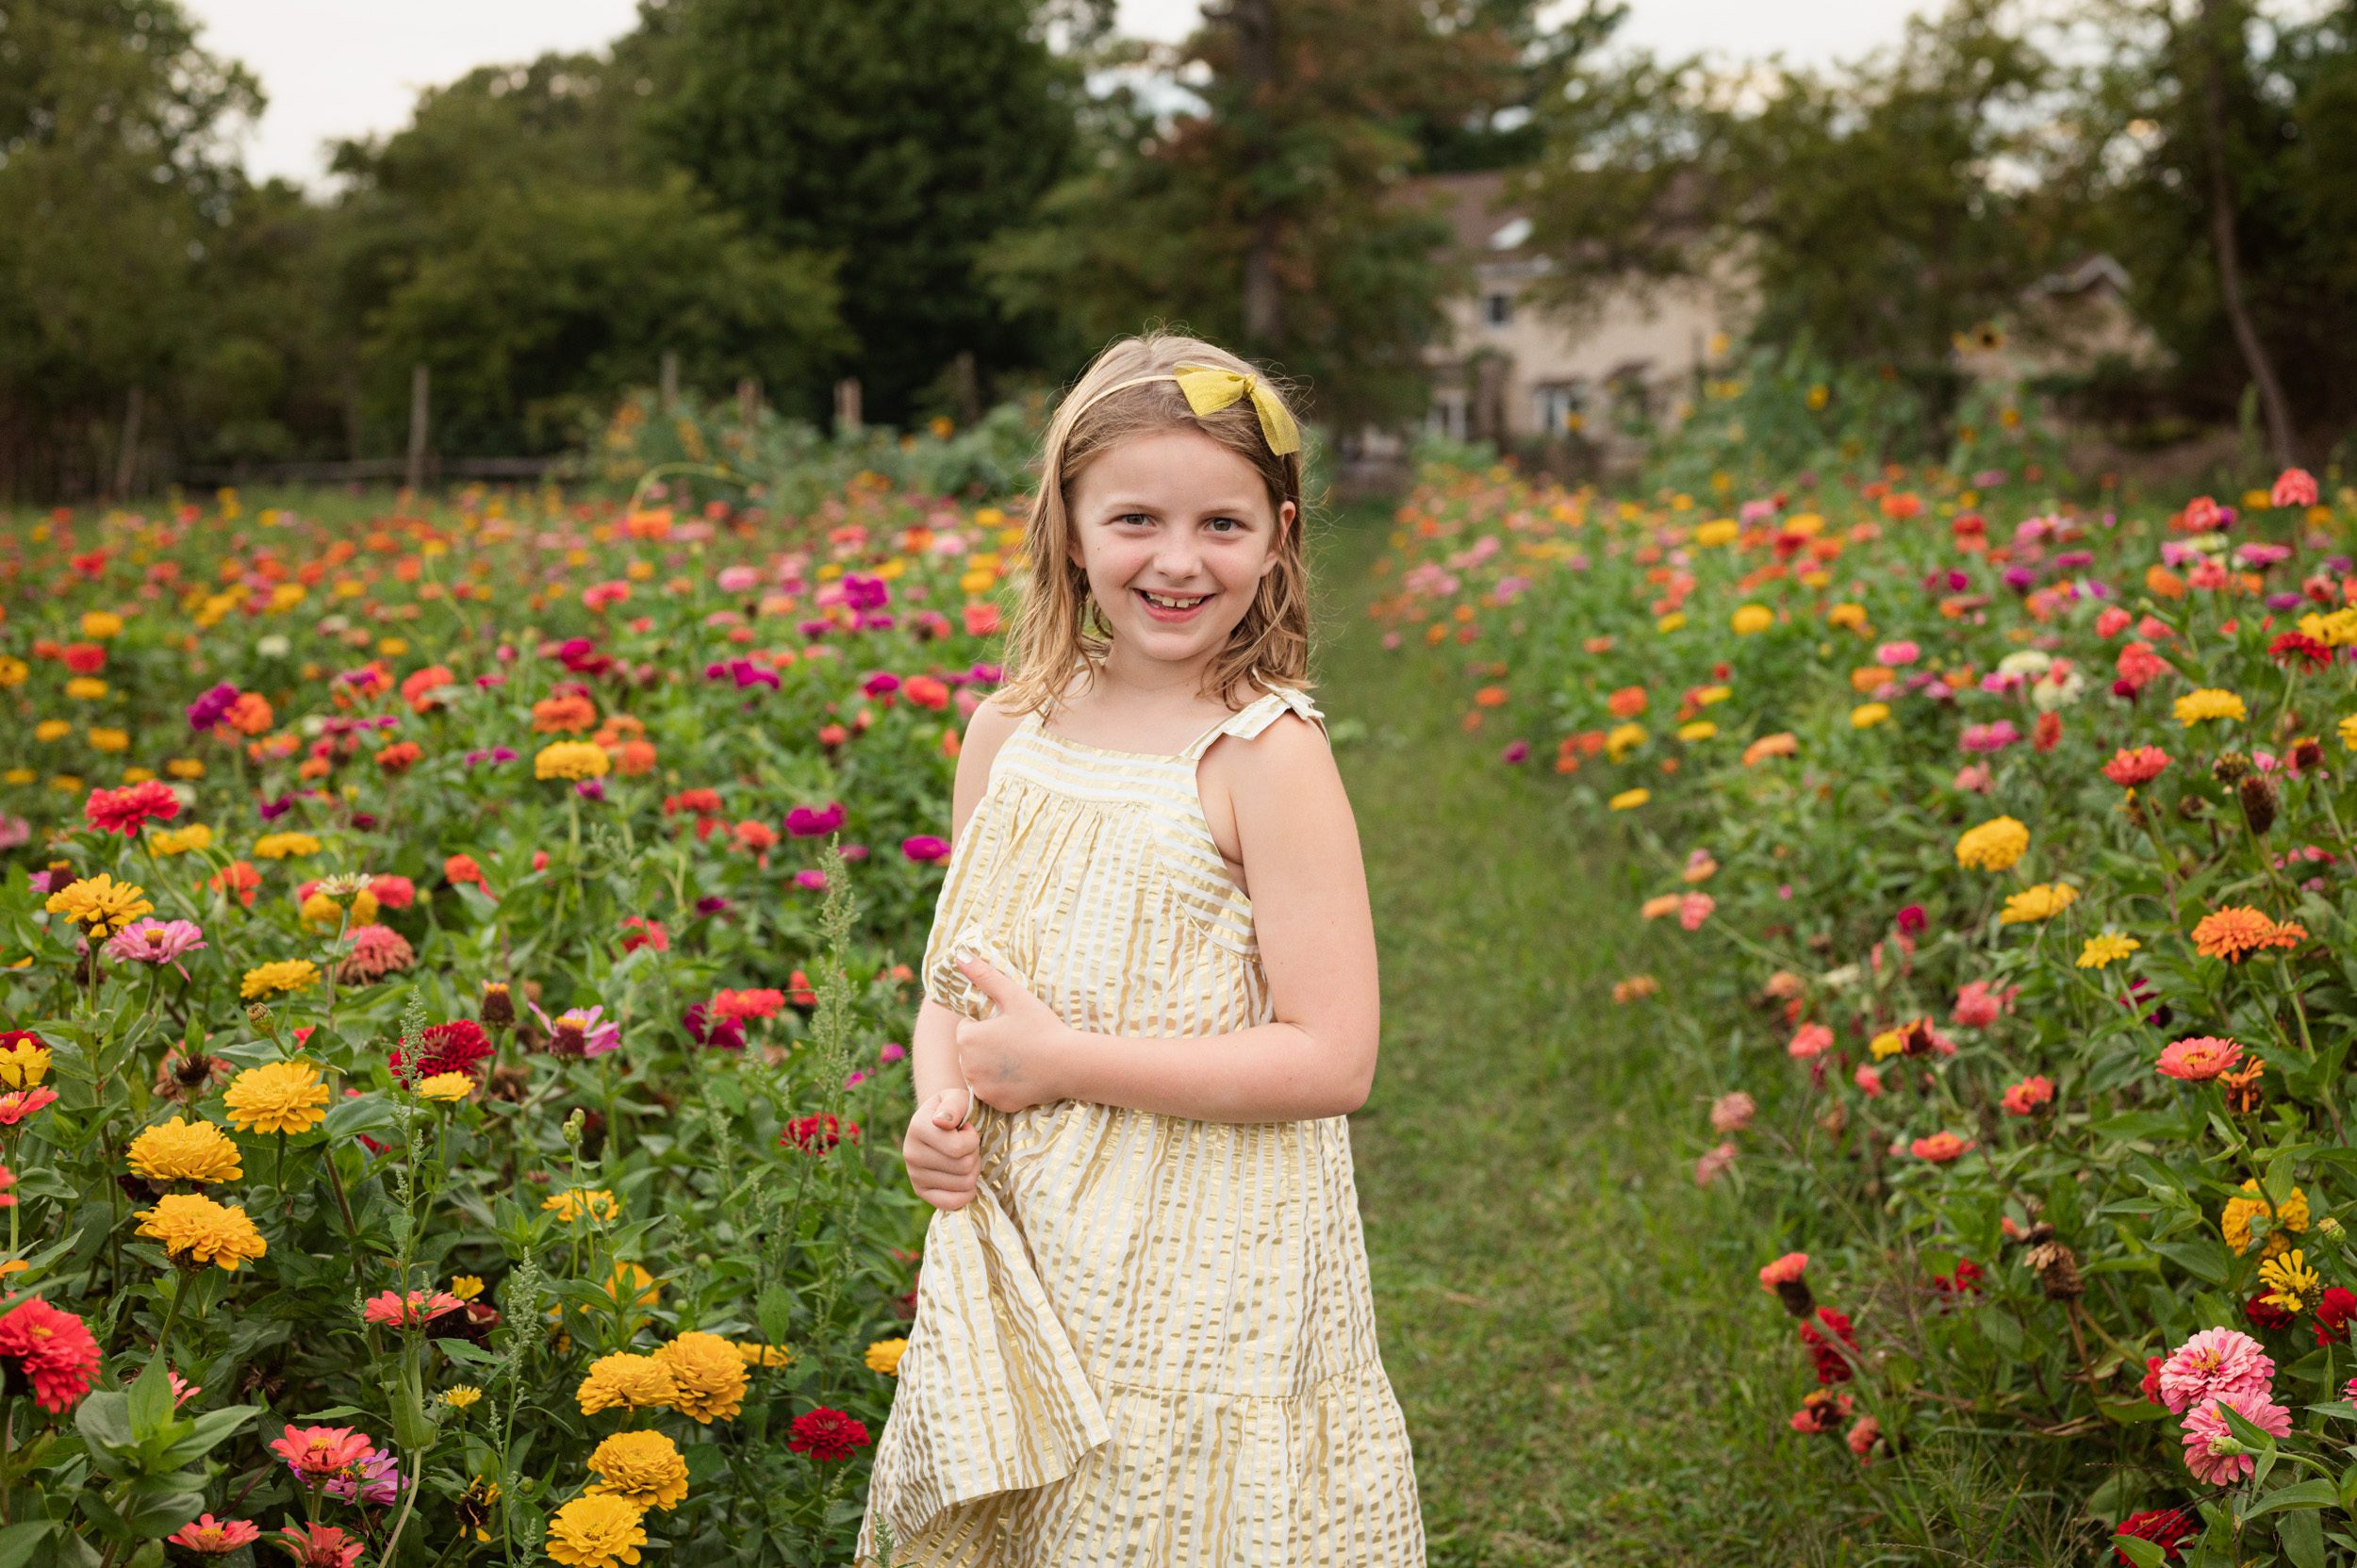 a young girl standing in a field of colorful flowers and smiling at the camera during a family photo session